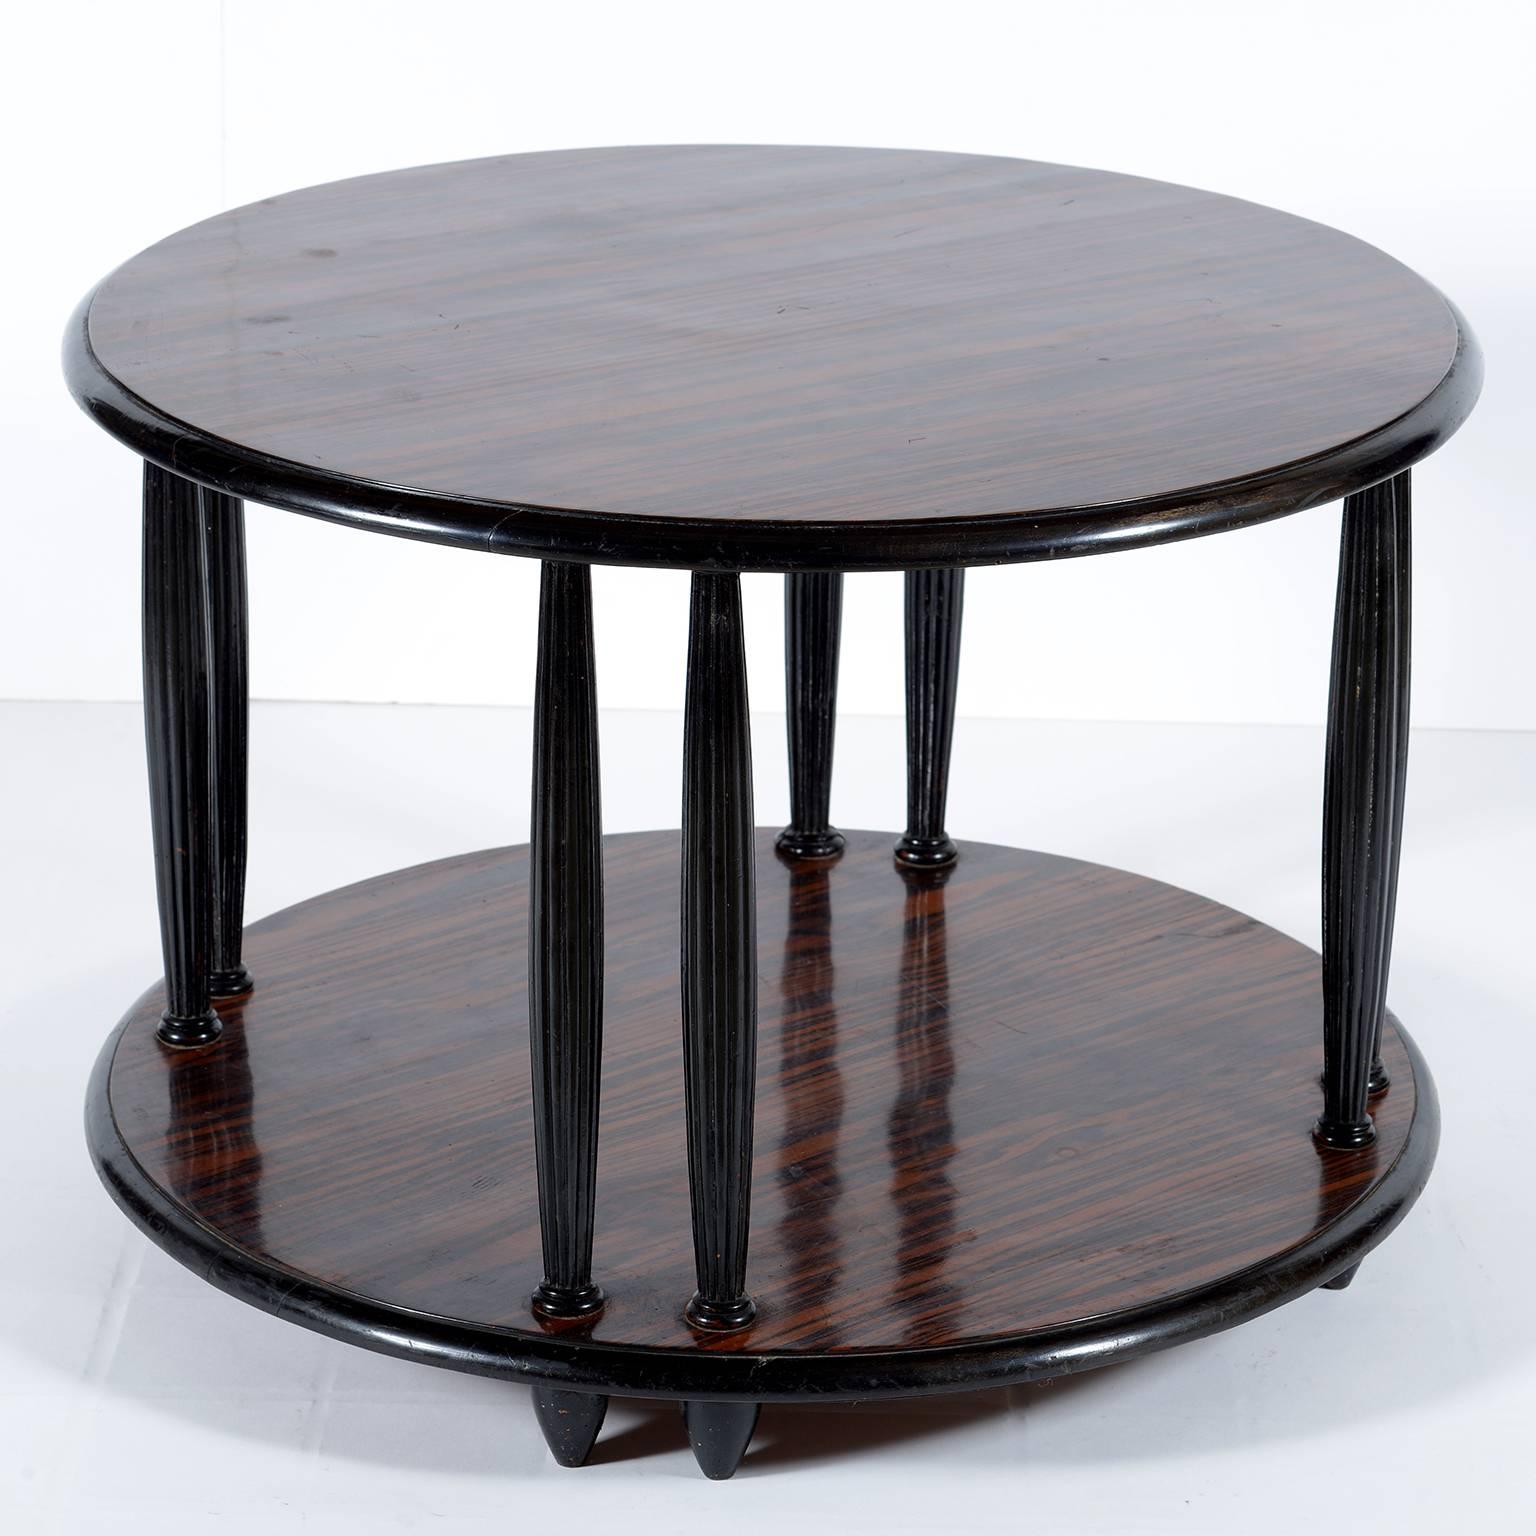 Black lacquered wood and important beautiful exotic wood round side or coffee table.
Double grooved legs in every side.
The low shelf give opportunity to put magazine or books under the top.
 